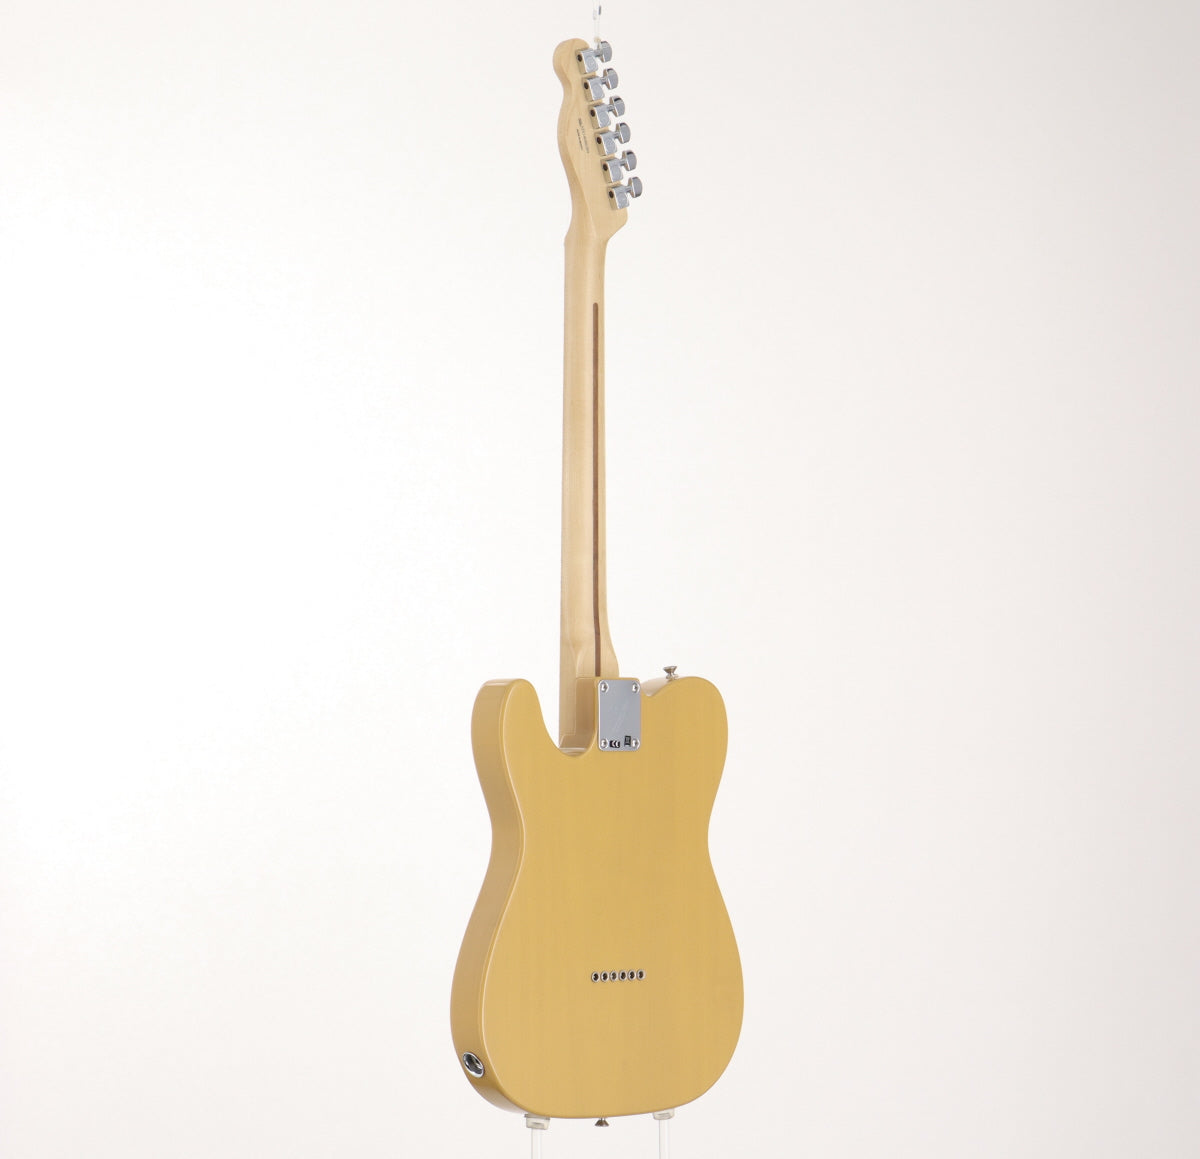 [SN MX18000] USED Fender / Player Series Telecaster Butterscotch Blonde Maple Fingerboard 2018 [09]